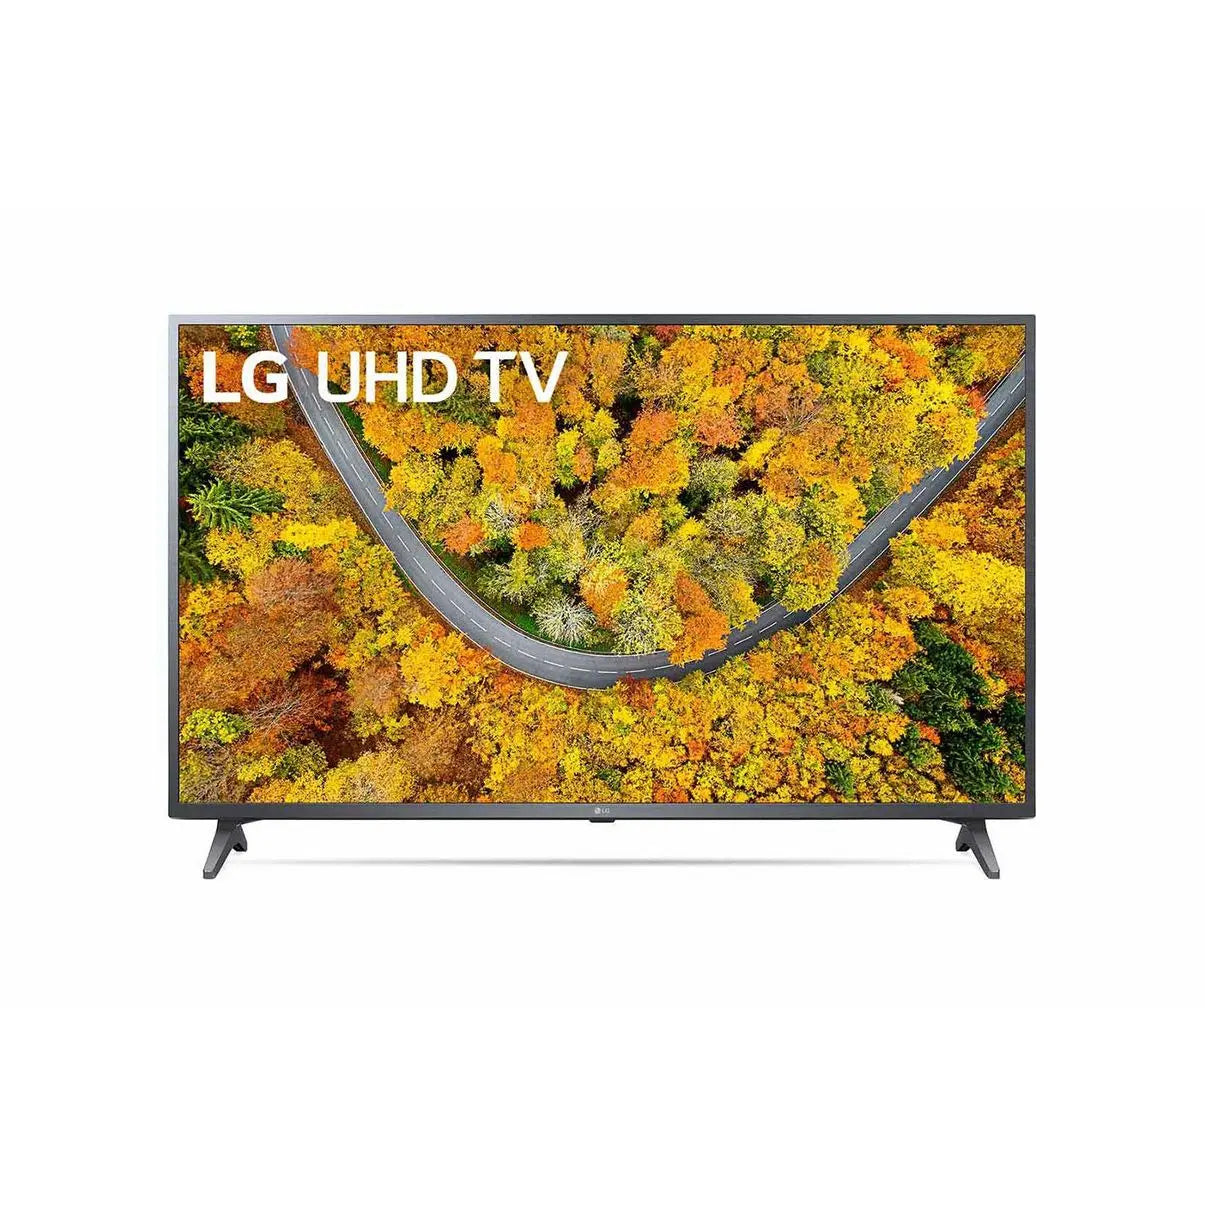 LG 65 Inch 4K UHD Smart LED TV with Built-in Receiver - 65UP7500PVG